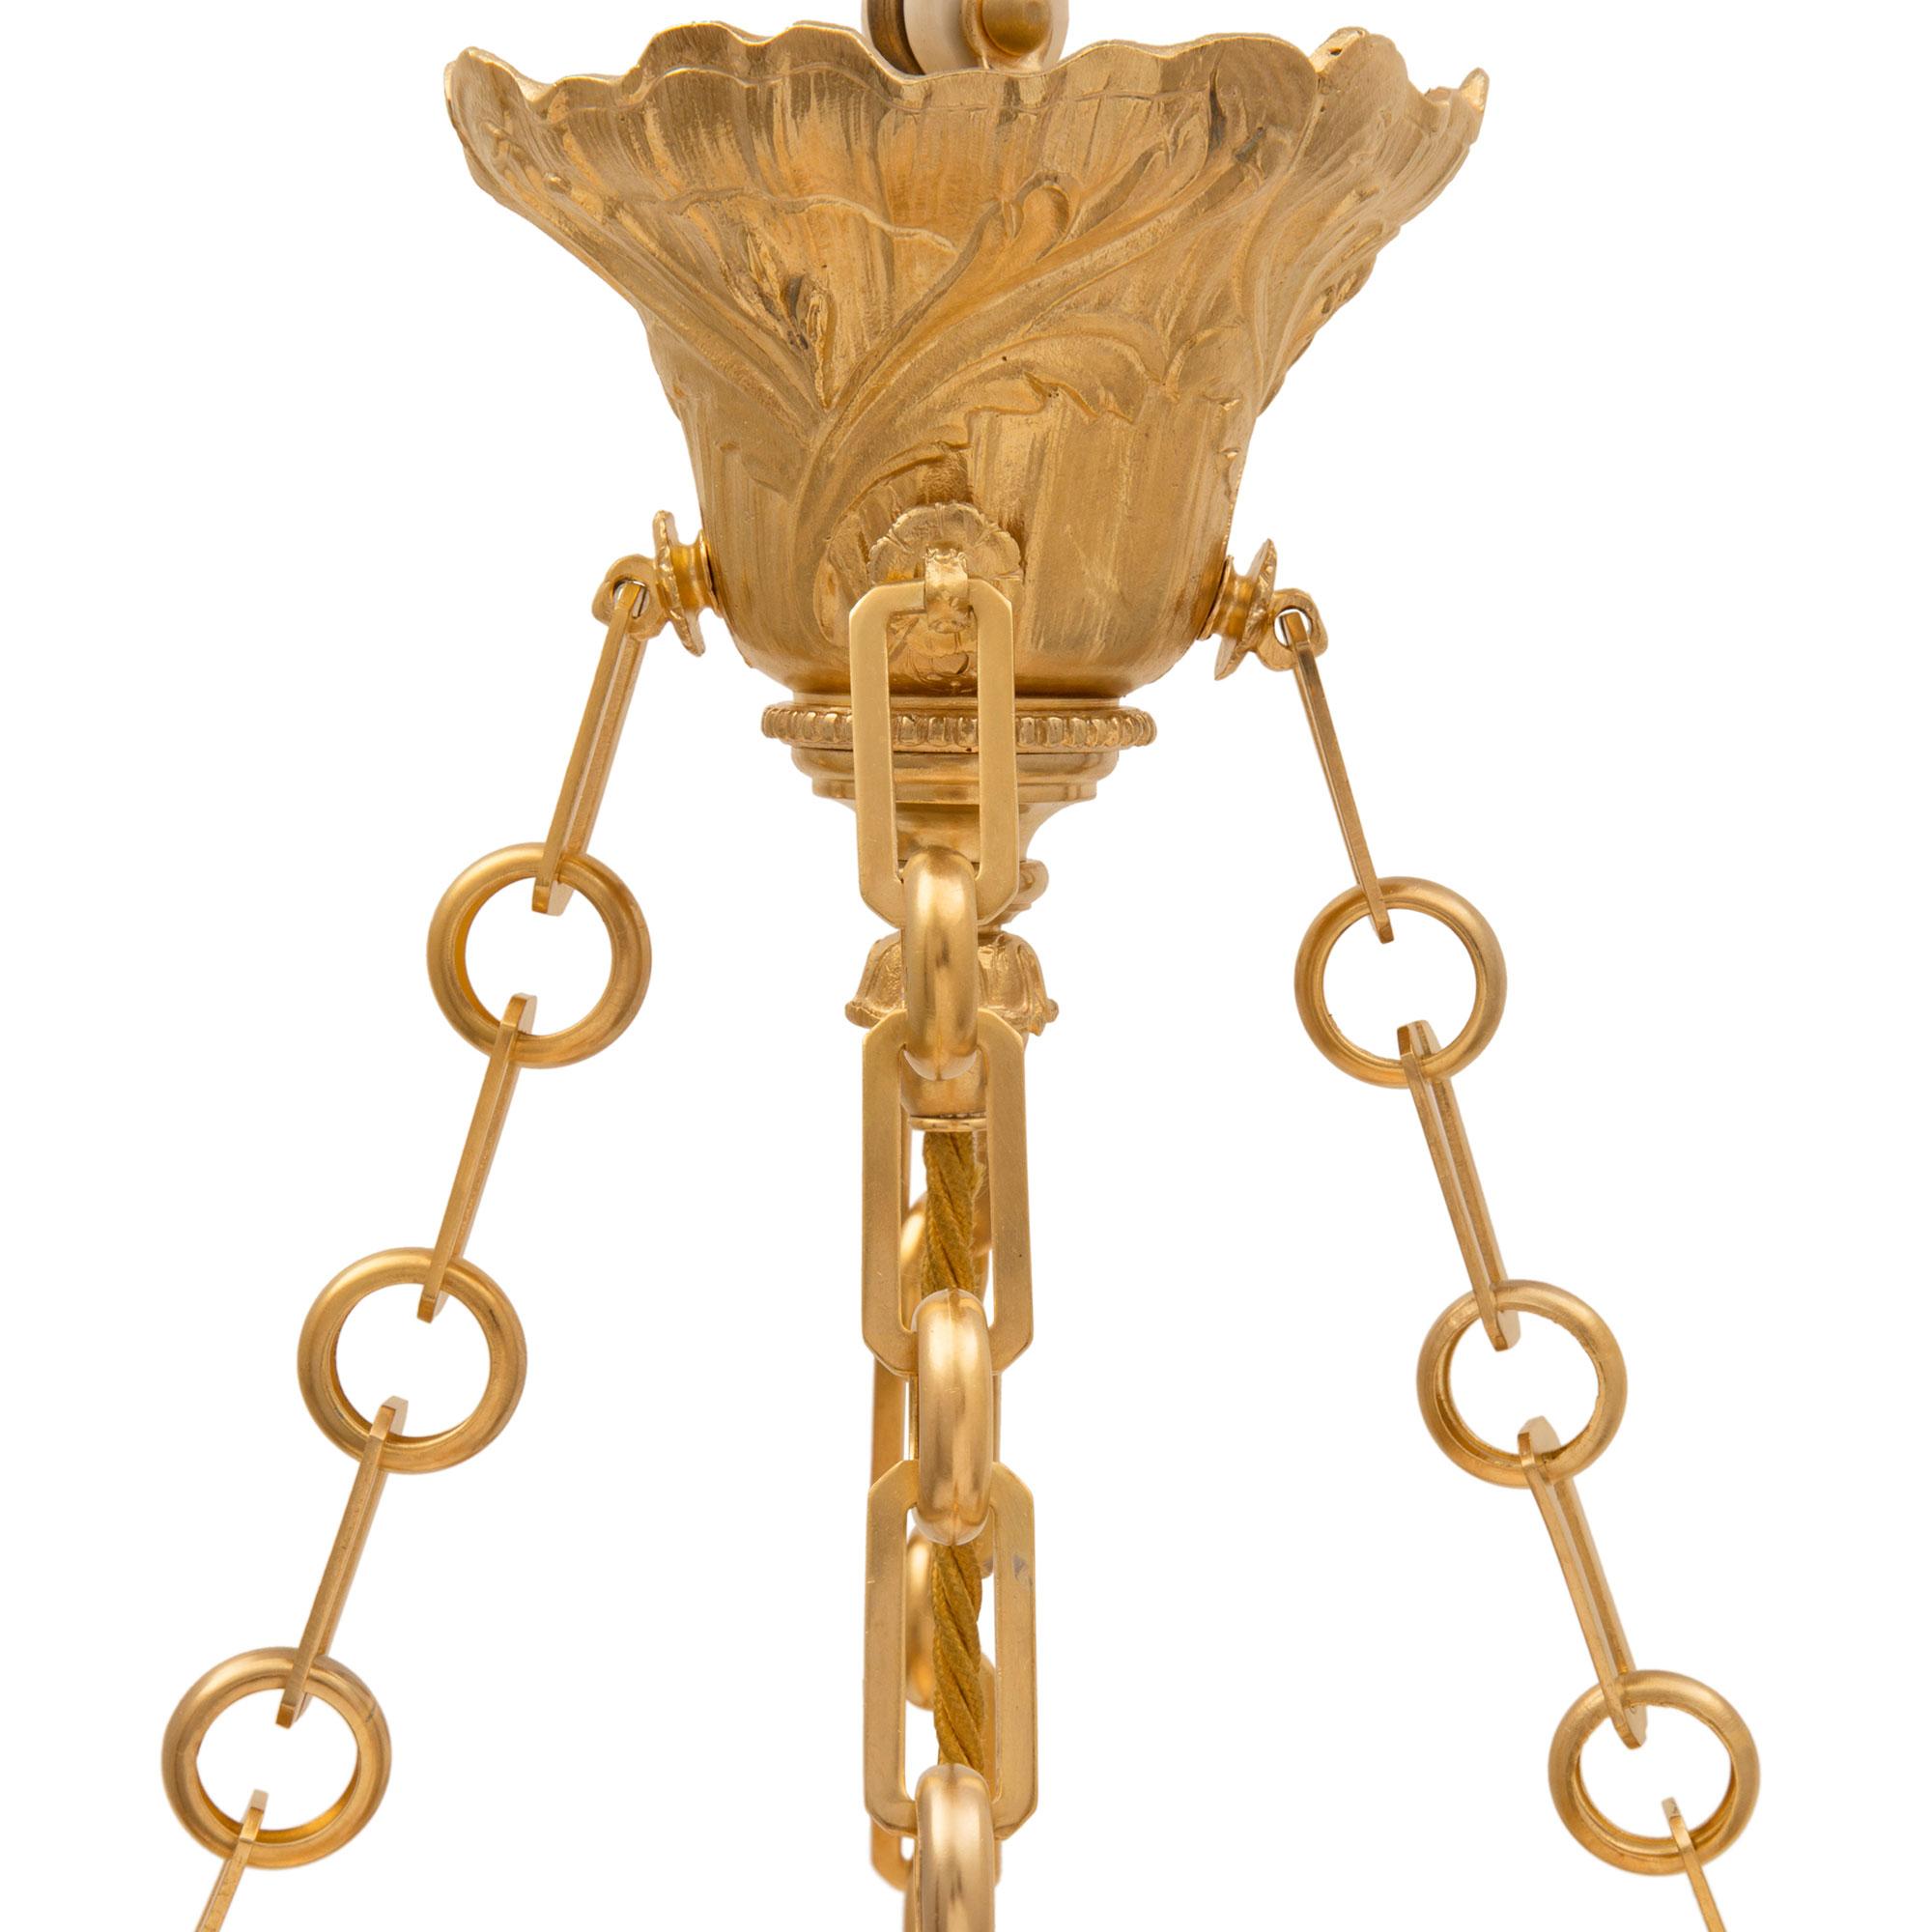 French 19th Century Louis XVI St. Baccarat Crystal and Ormolu Chandelier In Good Condition For Sale In West Palm Beach, FL